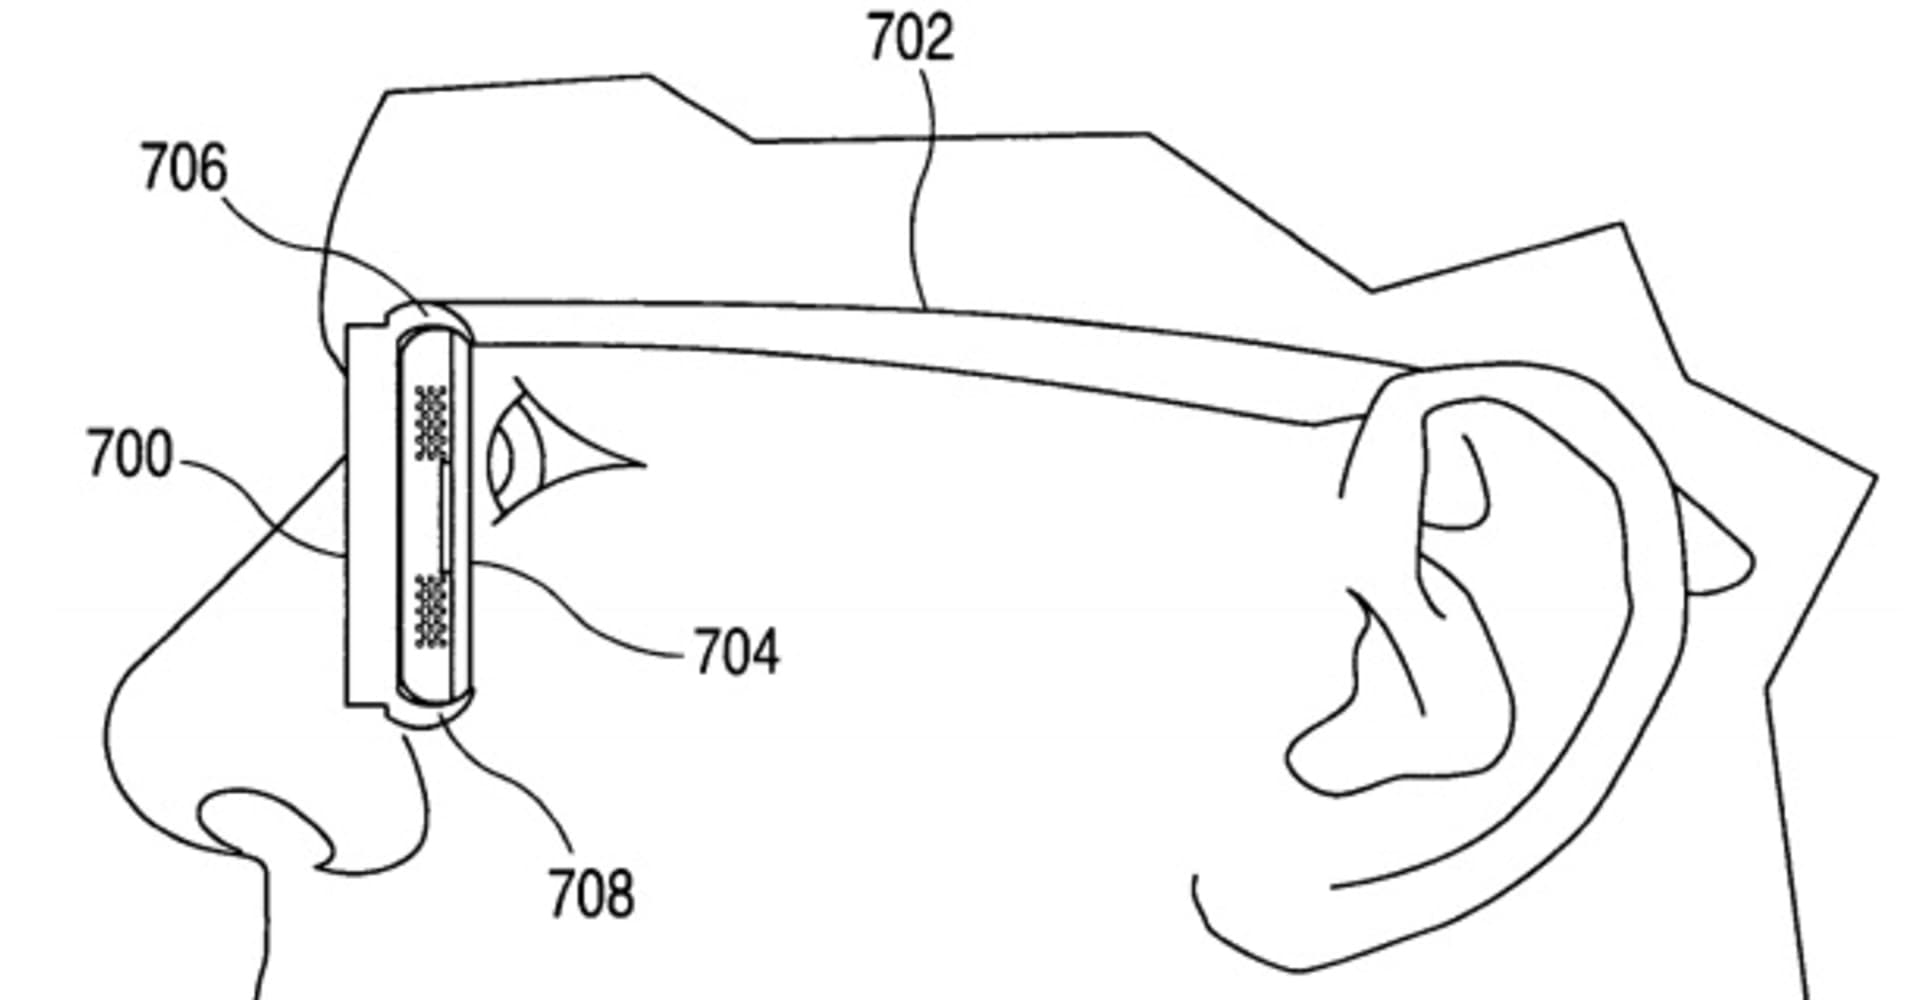 Apple wins patent for virtual reality goggles